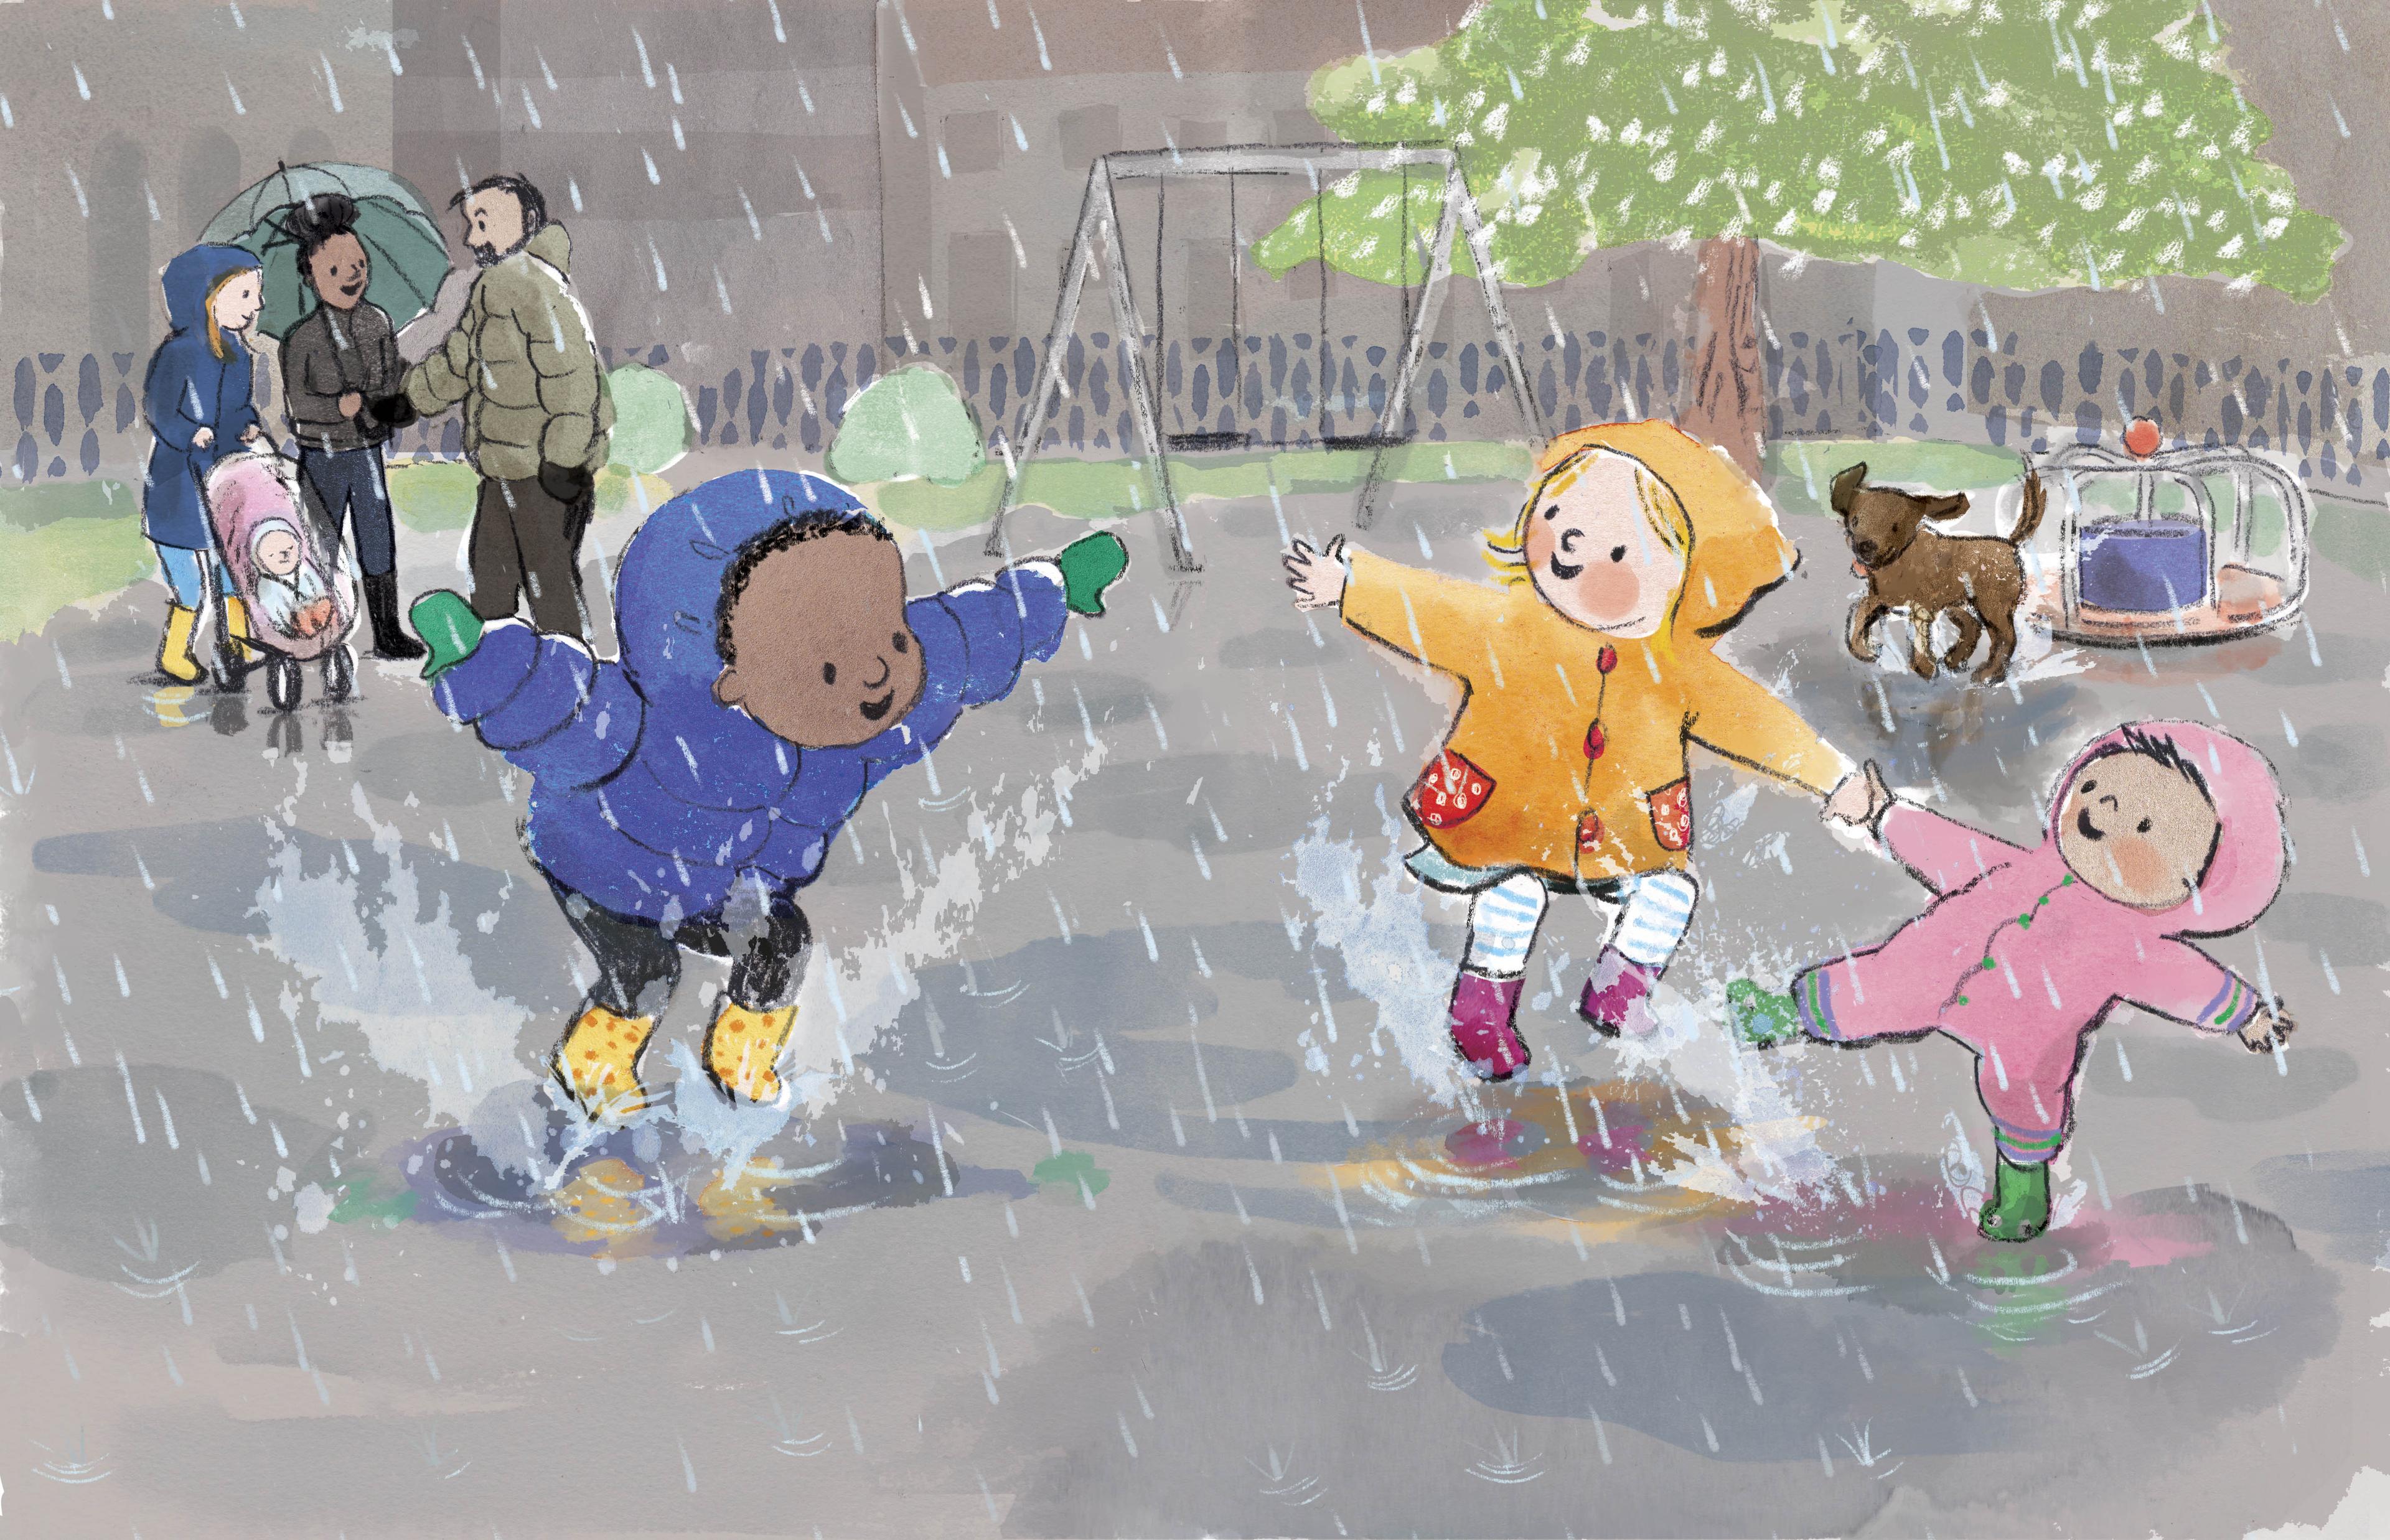 An illustration of three children splashing in puddles in a park, there are a group of adults and a child in a pram in the background.